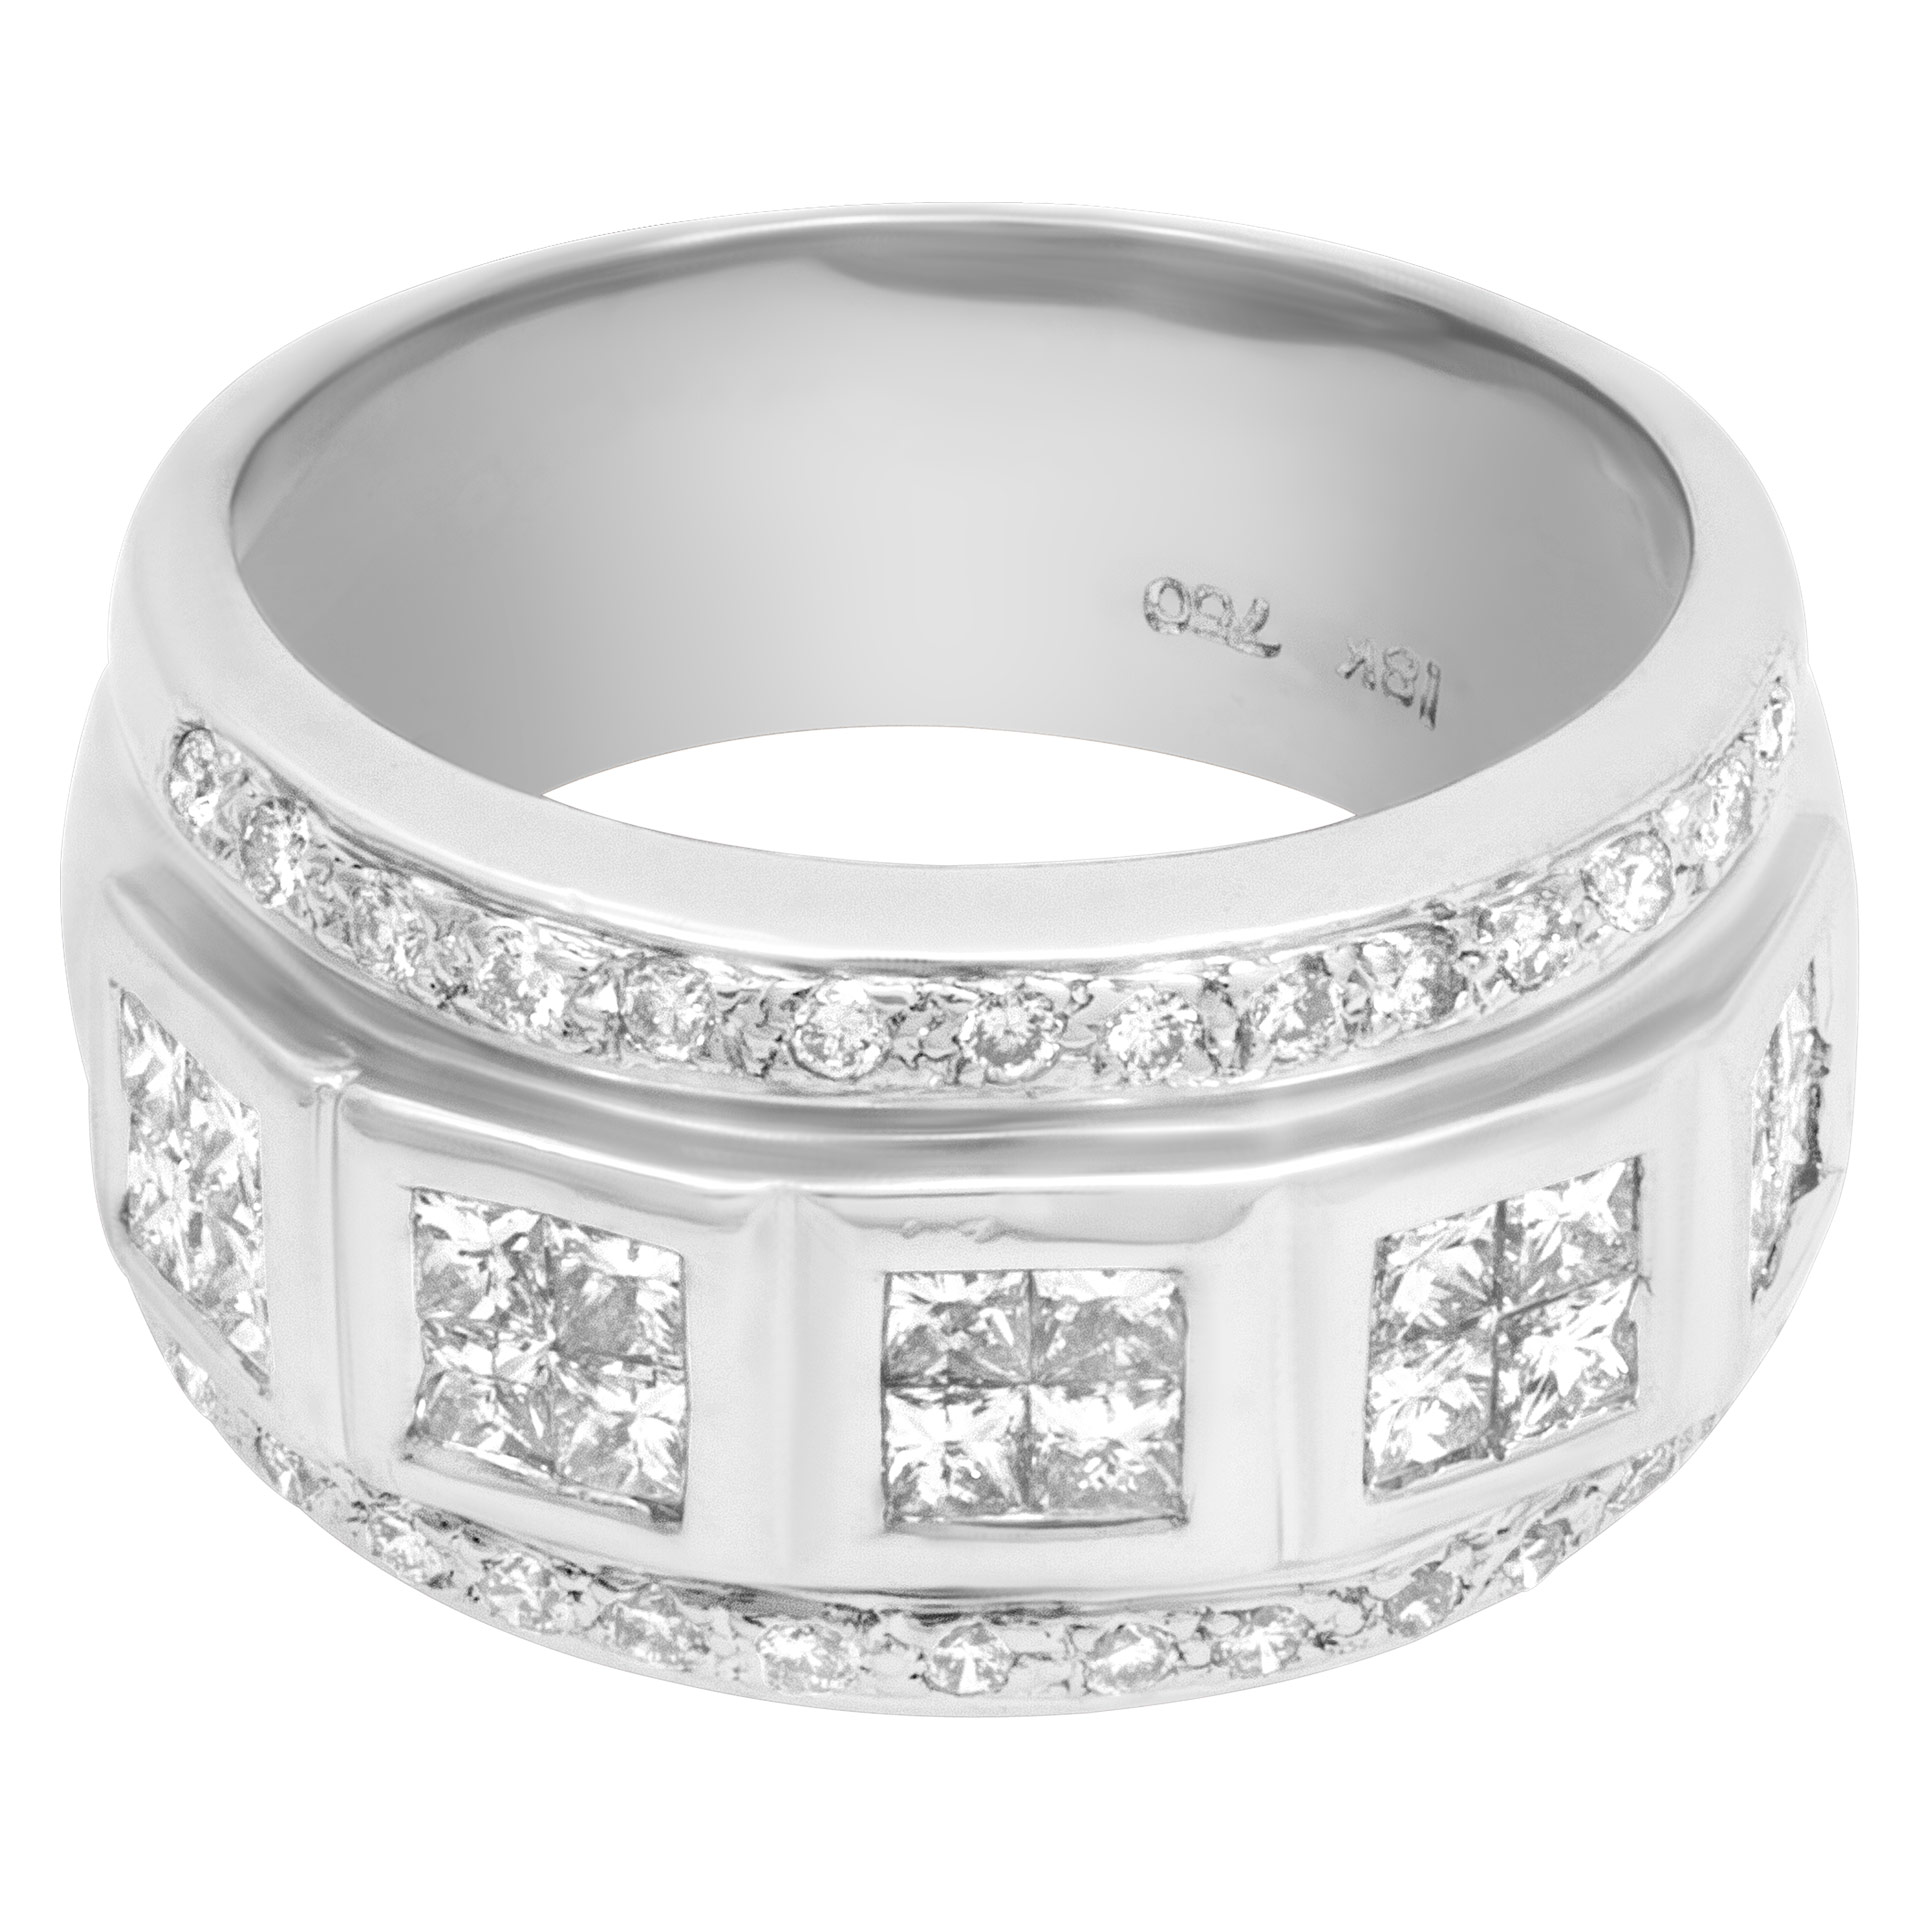 Round and princess cut diamond band in 18k white gold